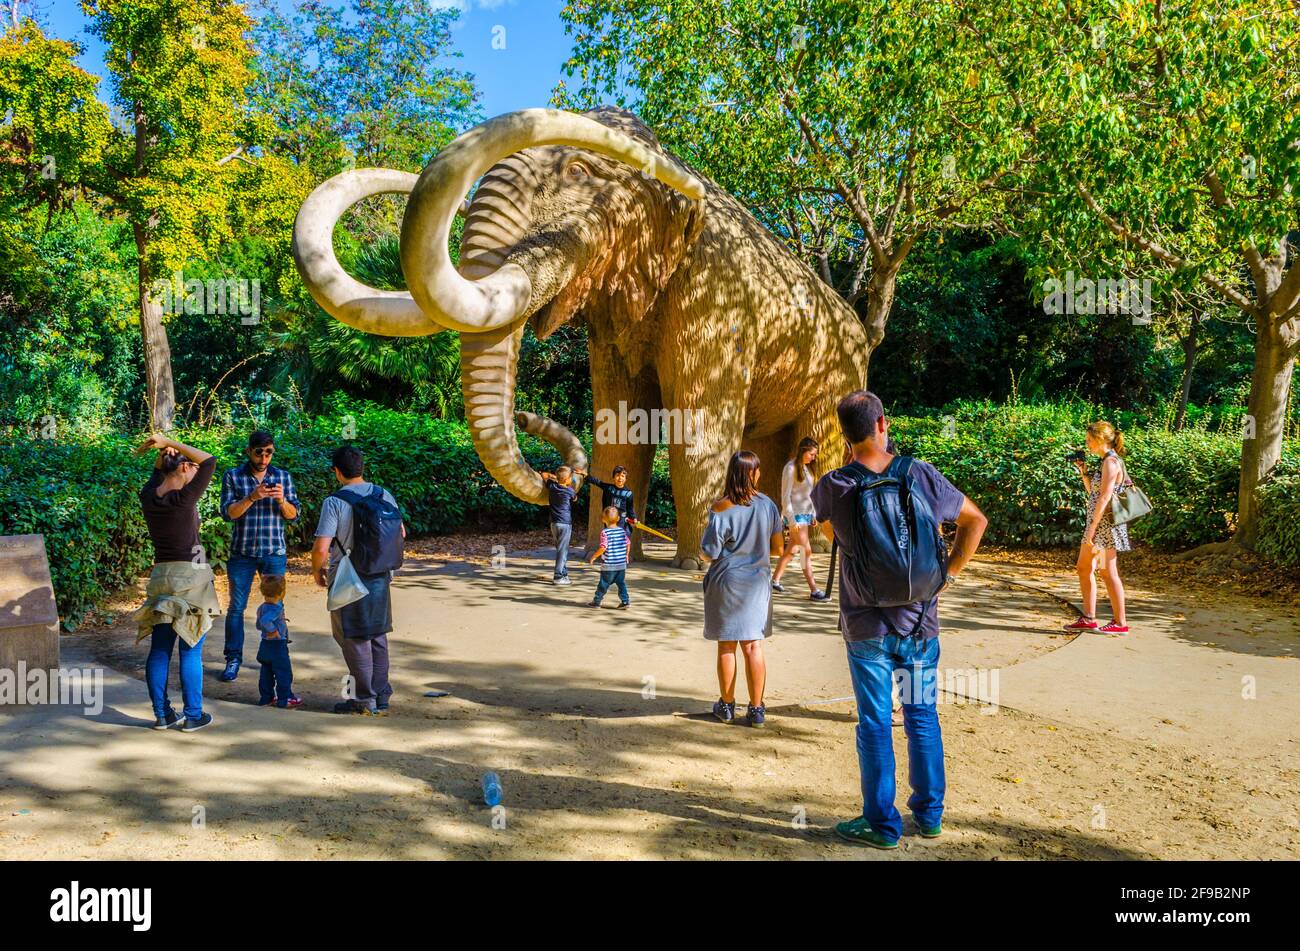 BARCELONA, SPAIN, OCTOBER 26,2014: People are passing Mammoth statue in the ciutadella park Barcelona, Spain. Stock Photo